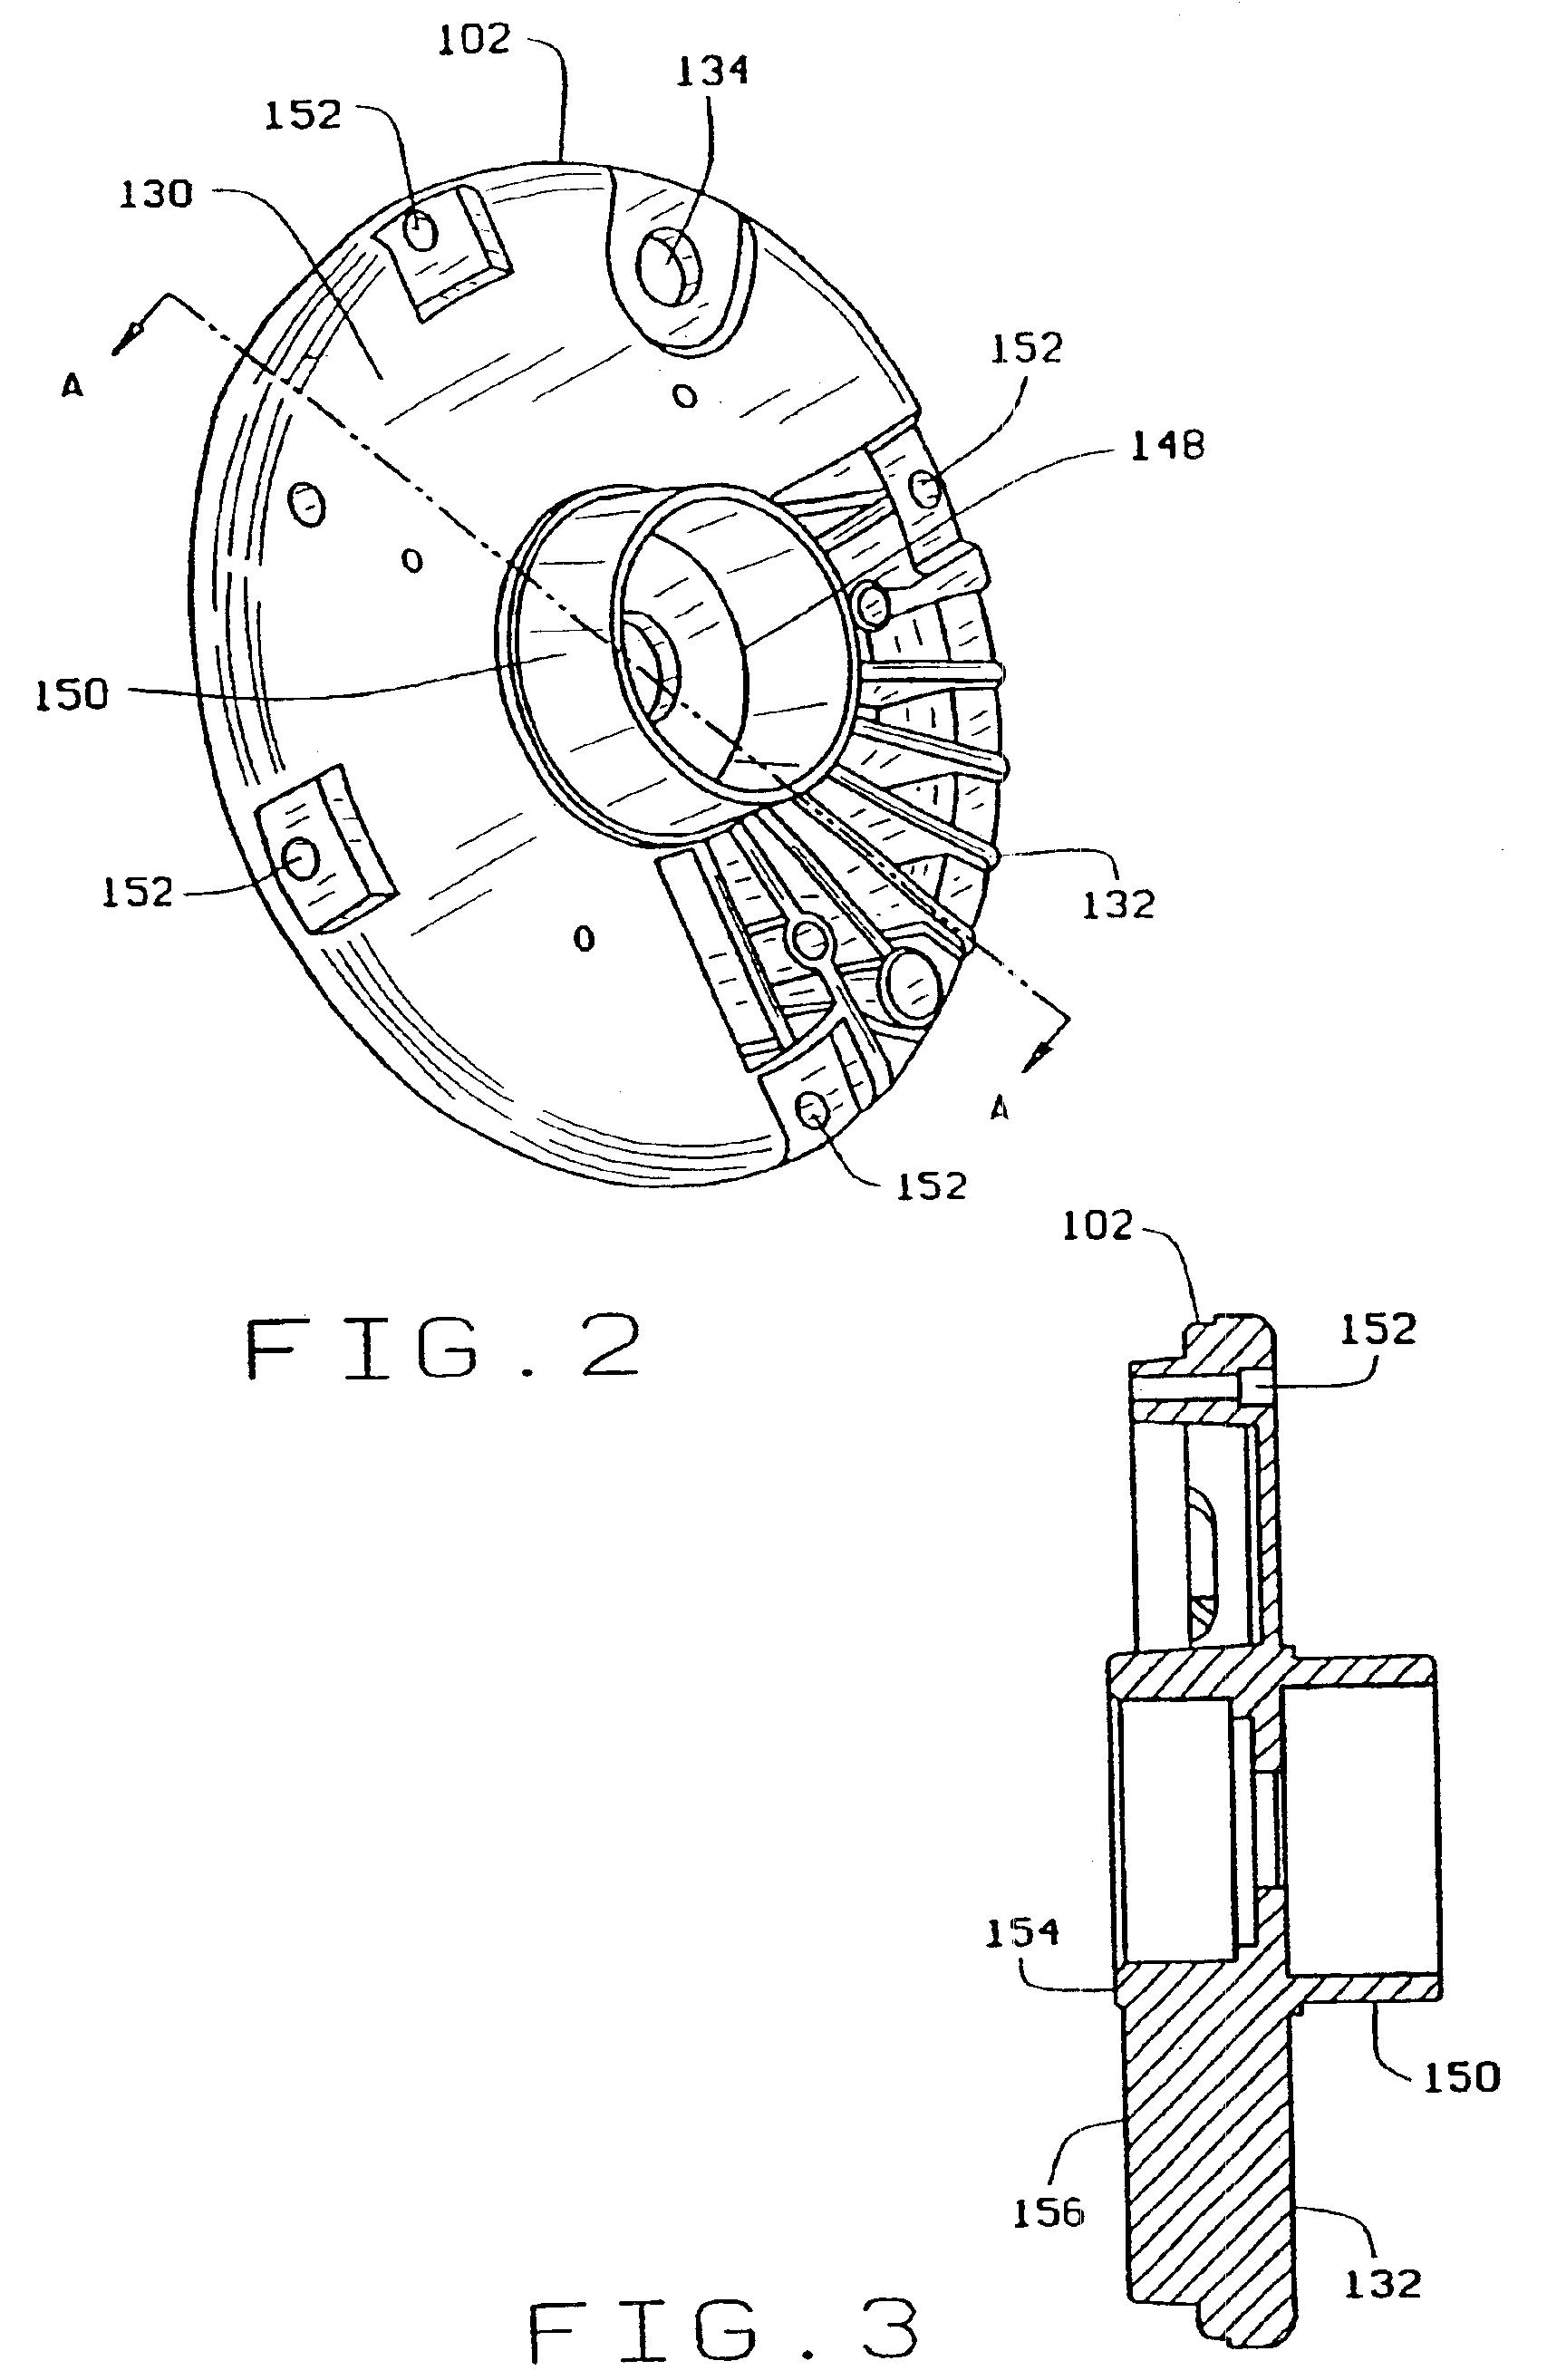 Motor endshield assembly for an electronically commutated motor